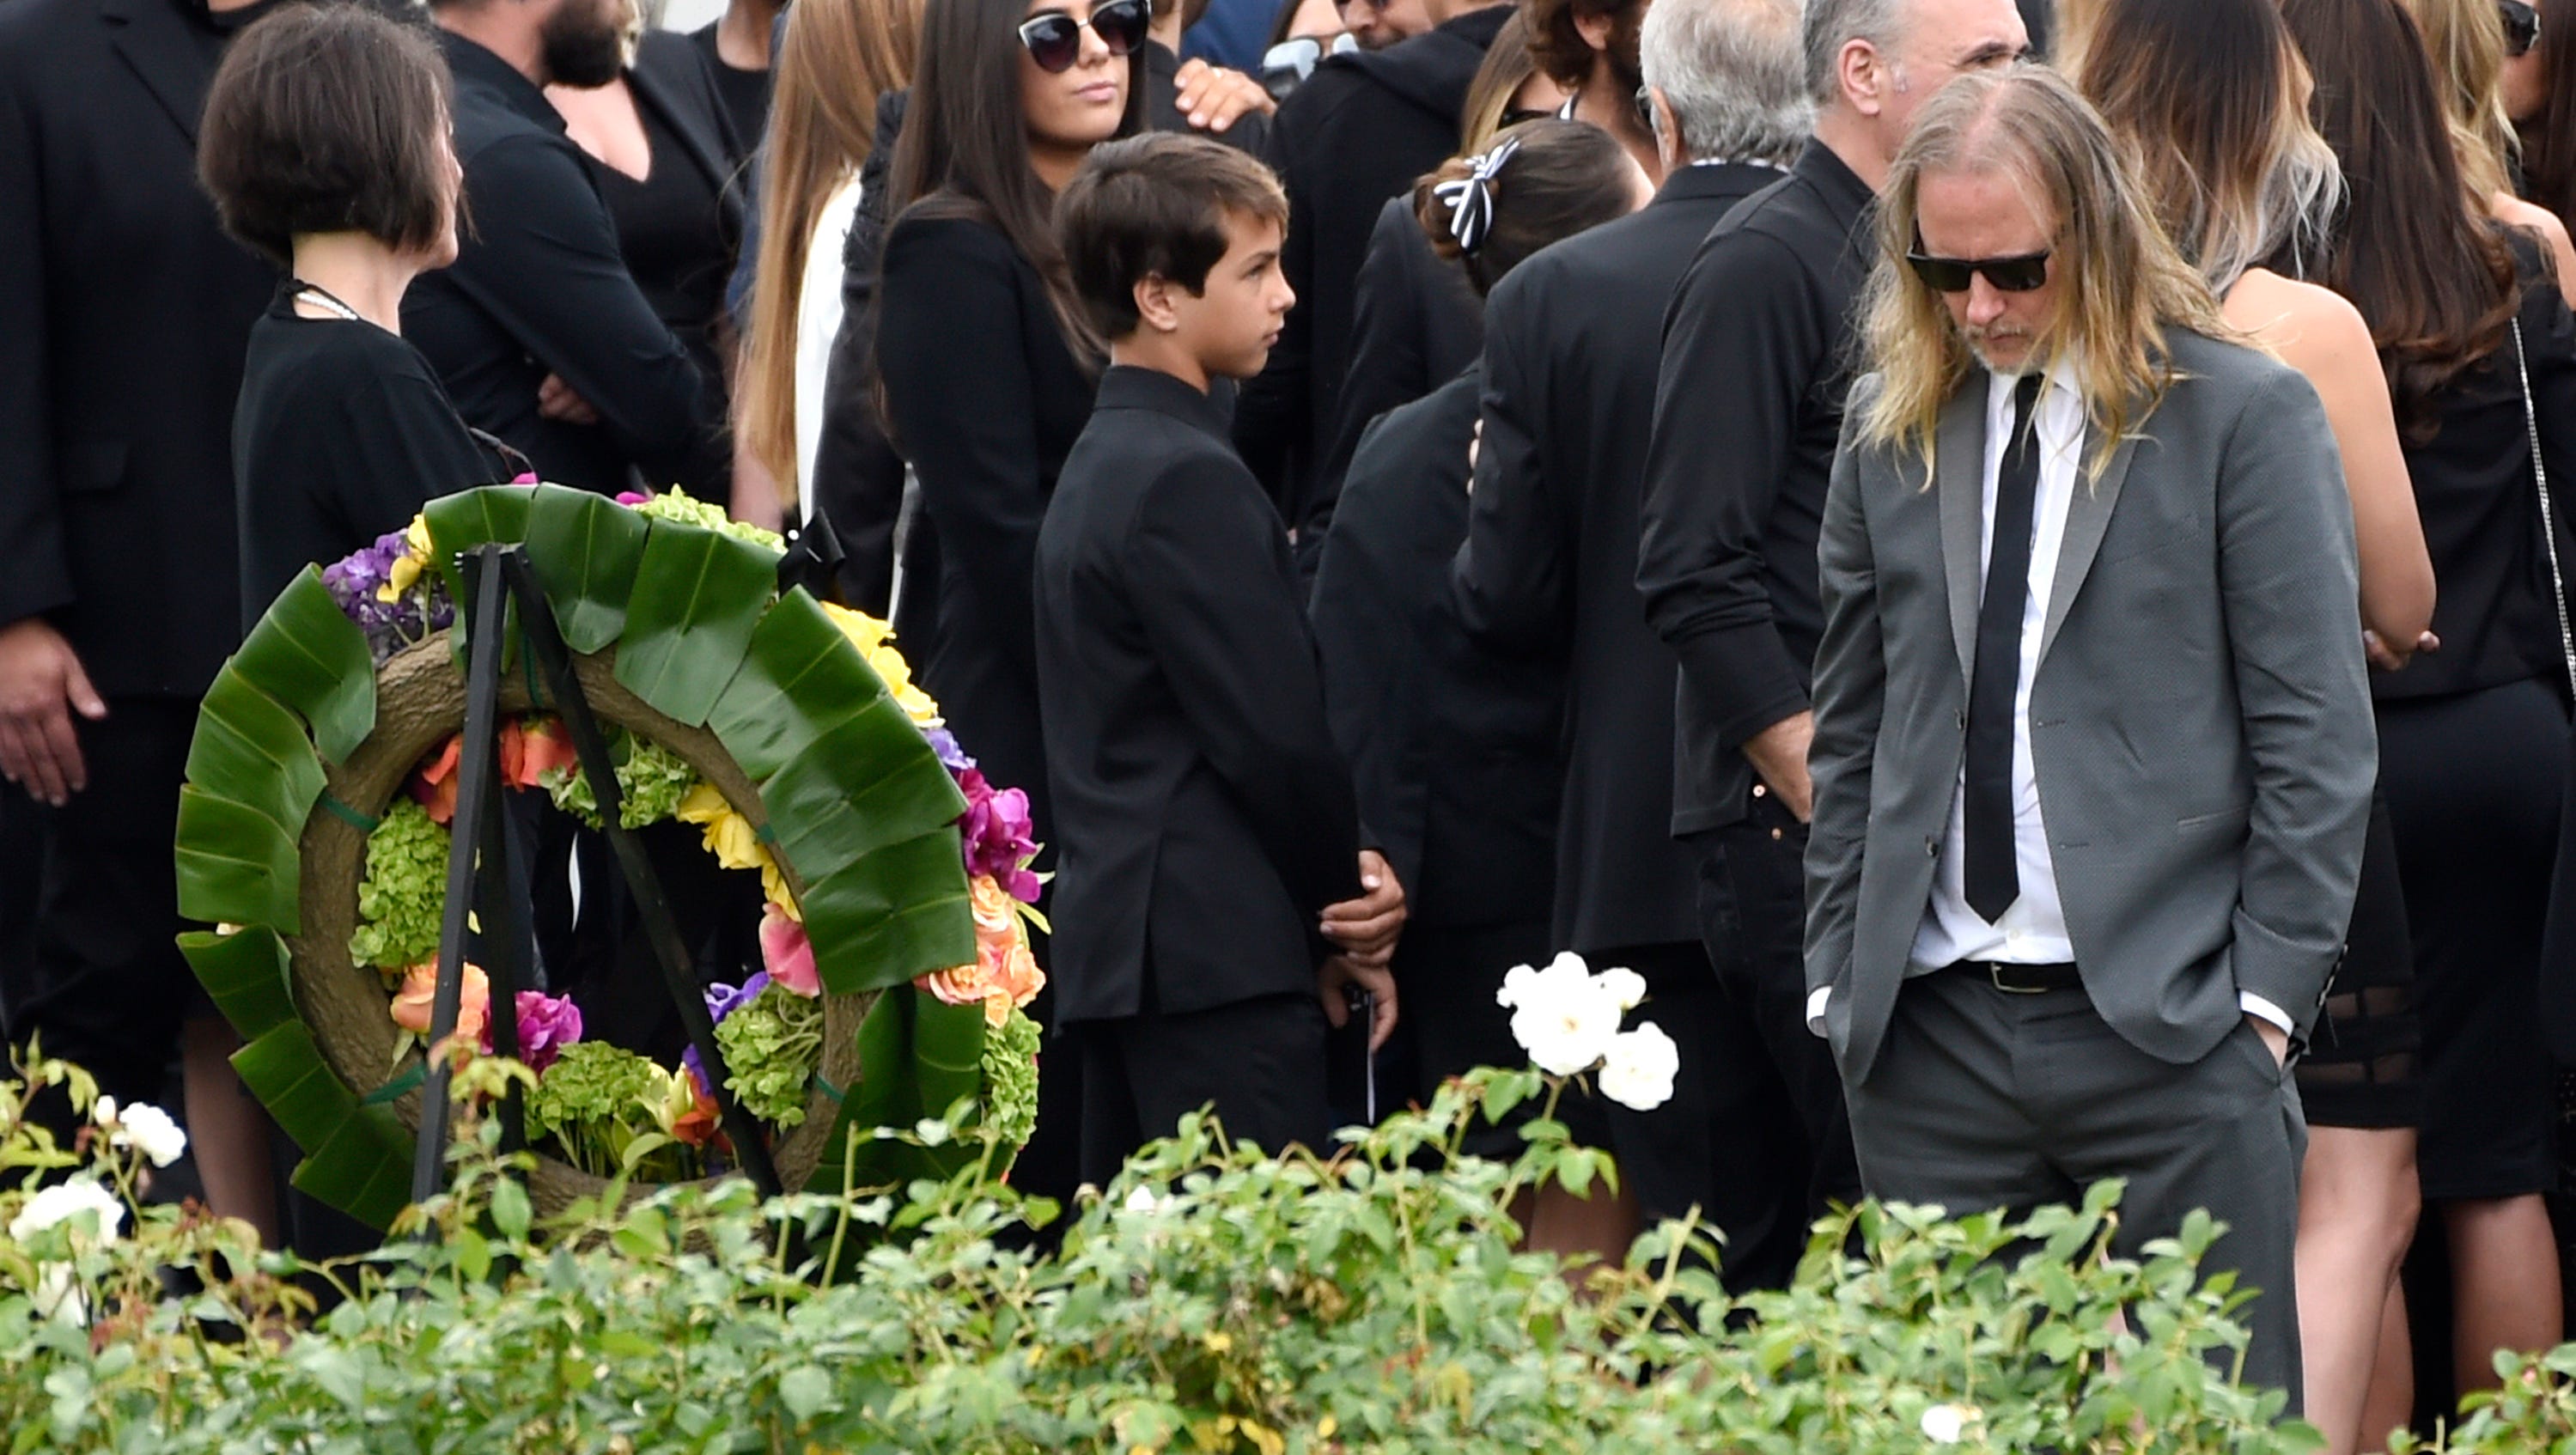 Jerry Cantrell attends a funeral for Chris Cornell at the Hollywood Forever Cemetery on Friday, May 26, 2017, in Los Angeles.